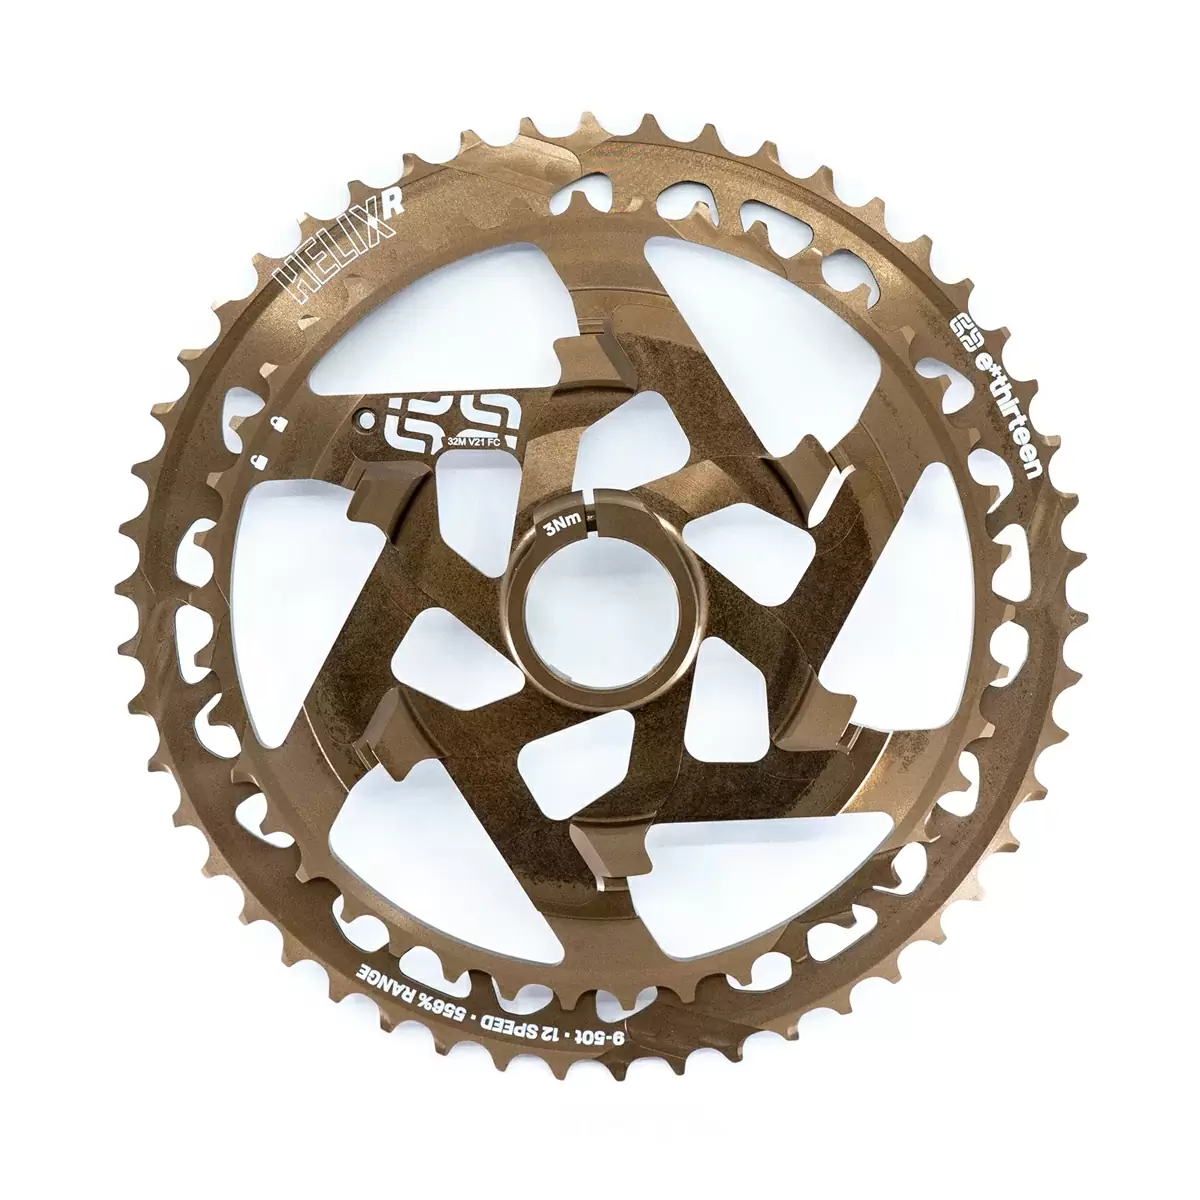 Helix Race 12s Cassette Replacement Cluster 42-50T SRAM XD/XDR Bronze - image